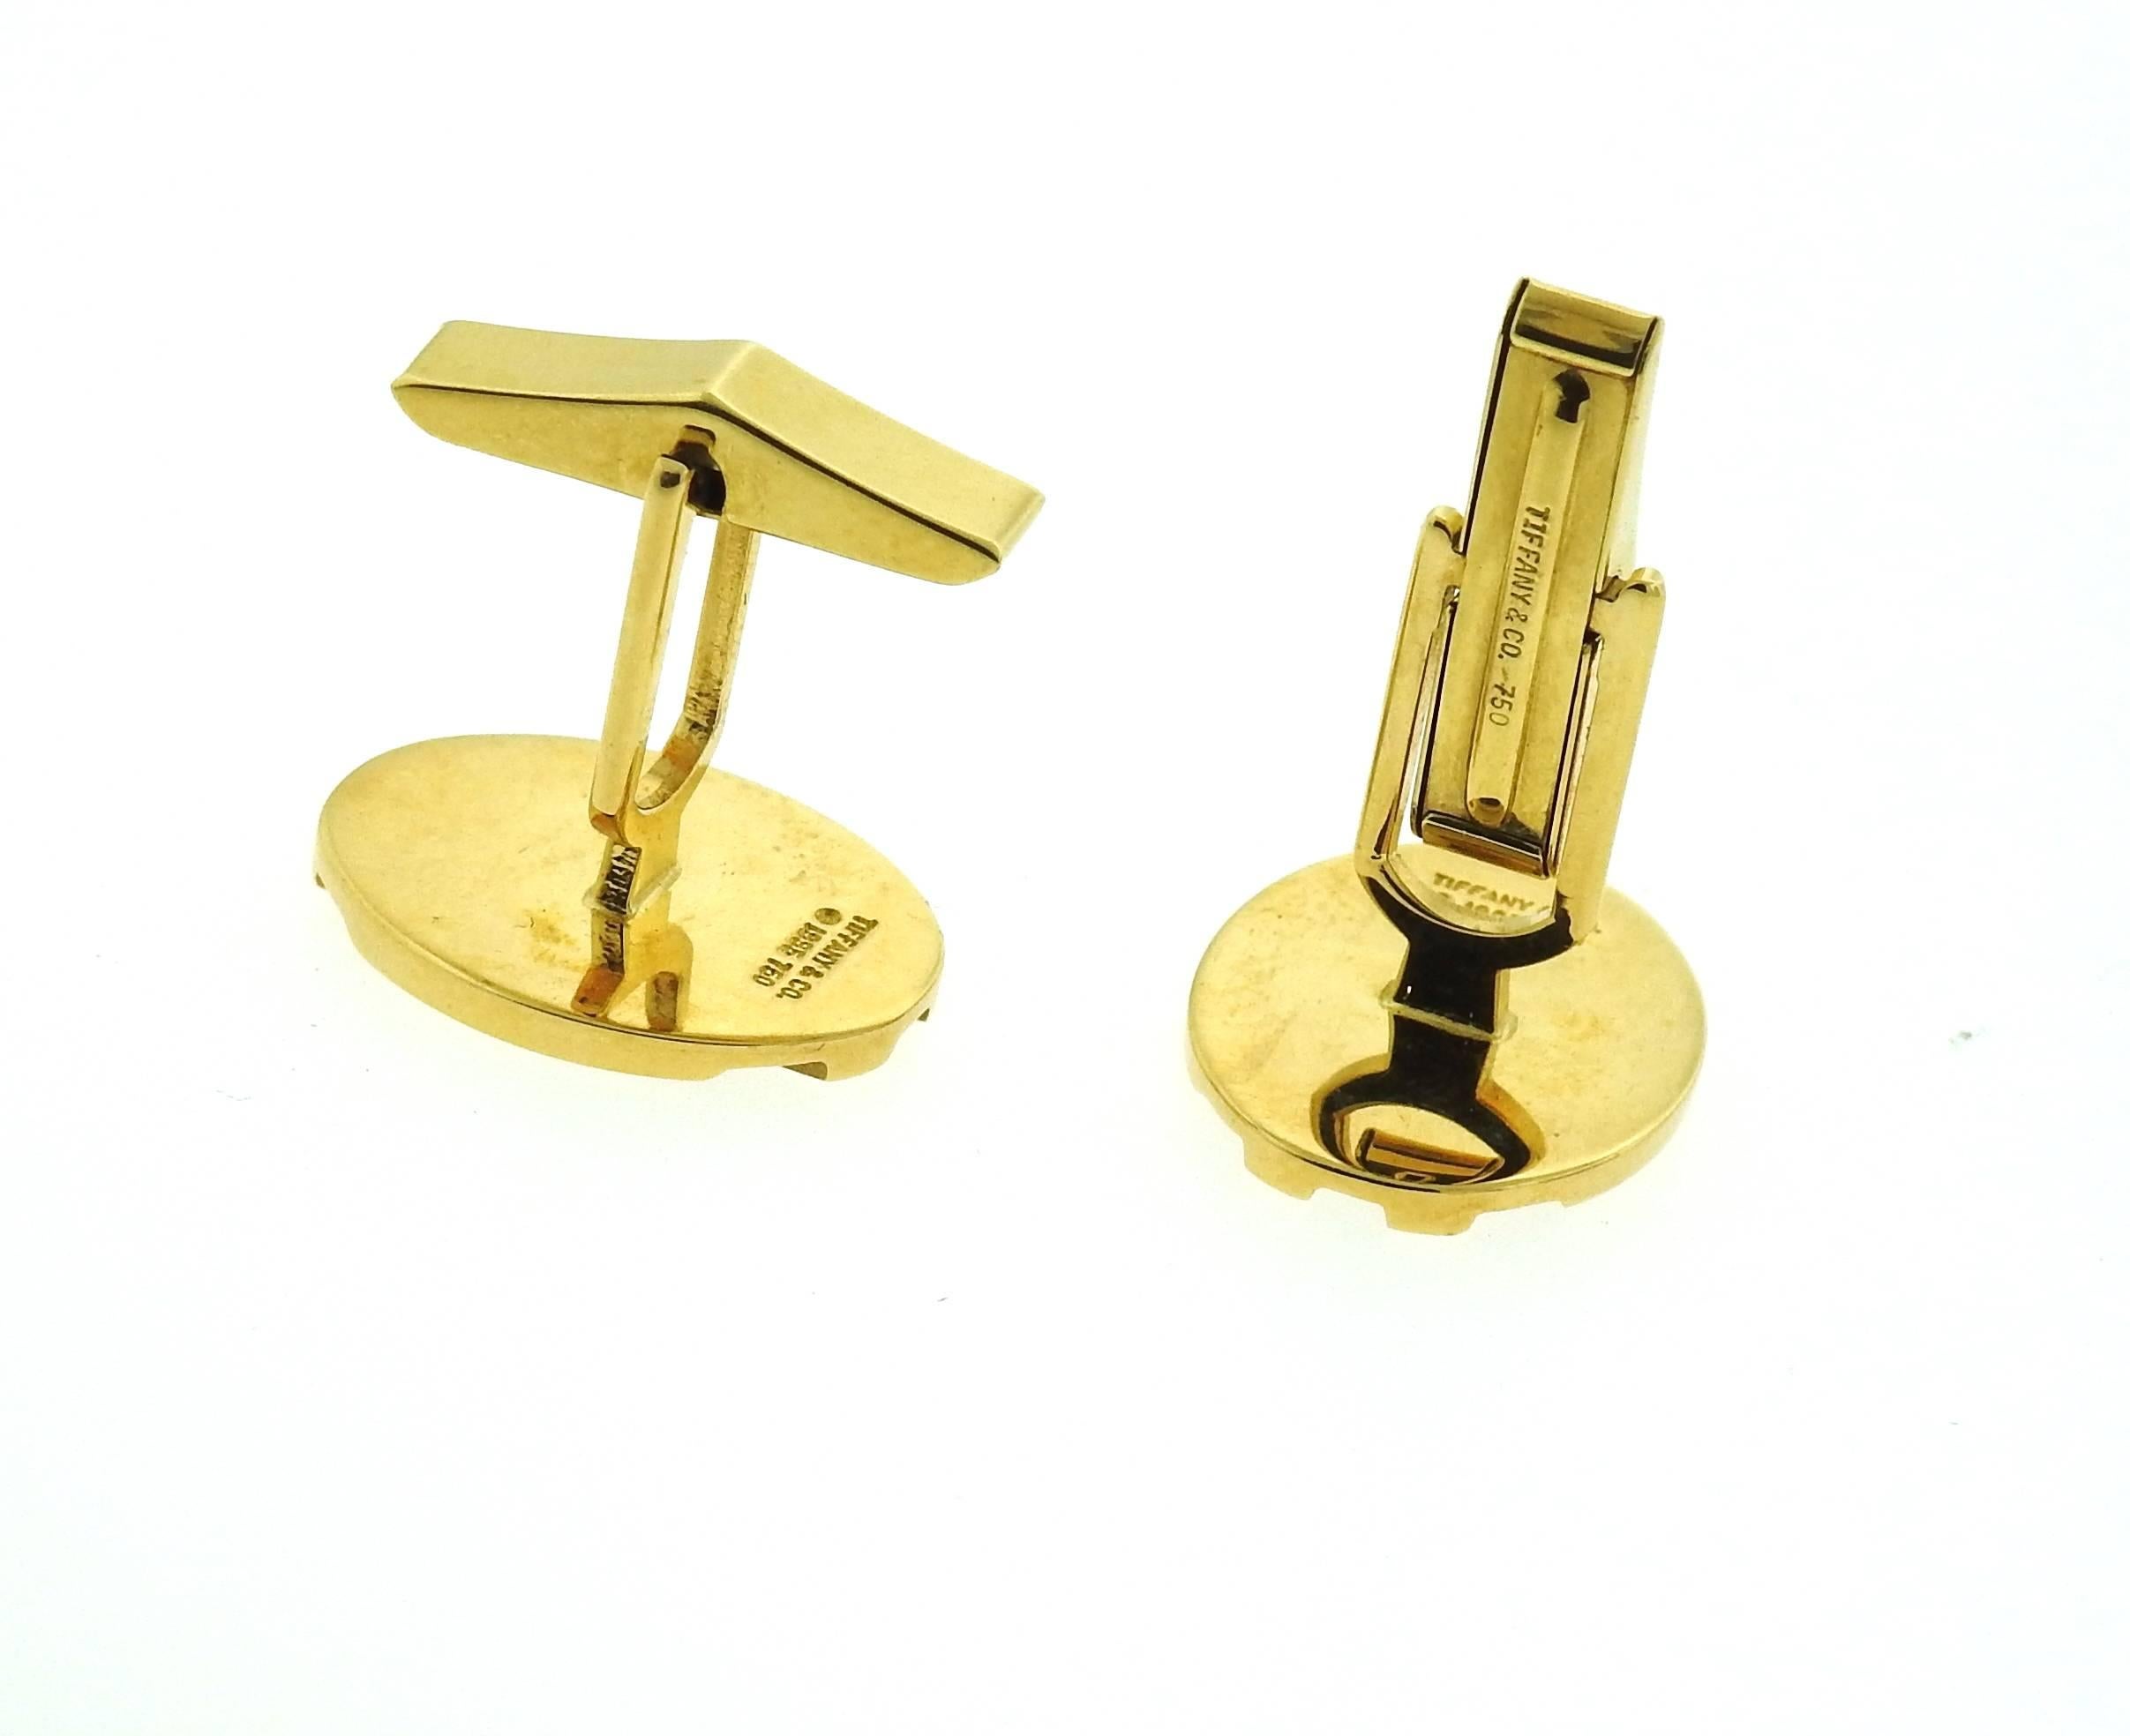 A pair of 18k yellow gold oval cufflinks, crafted by Tiffany & Co. Tops measure 19.7mm x 15mm. Marked: Tiffany & Co. 1995 750.. Weight - 15.6 grams